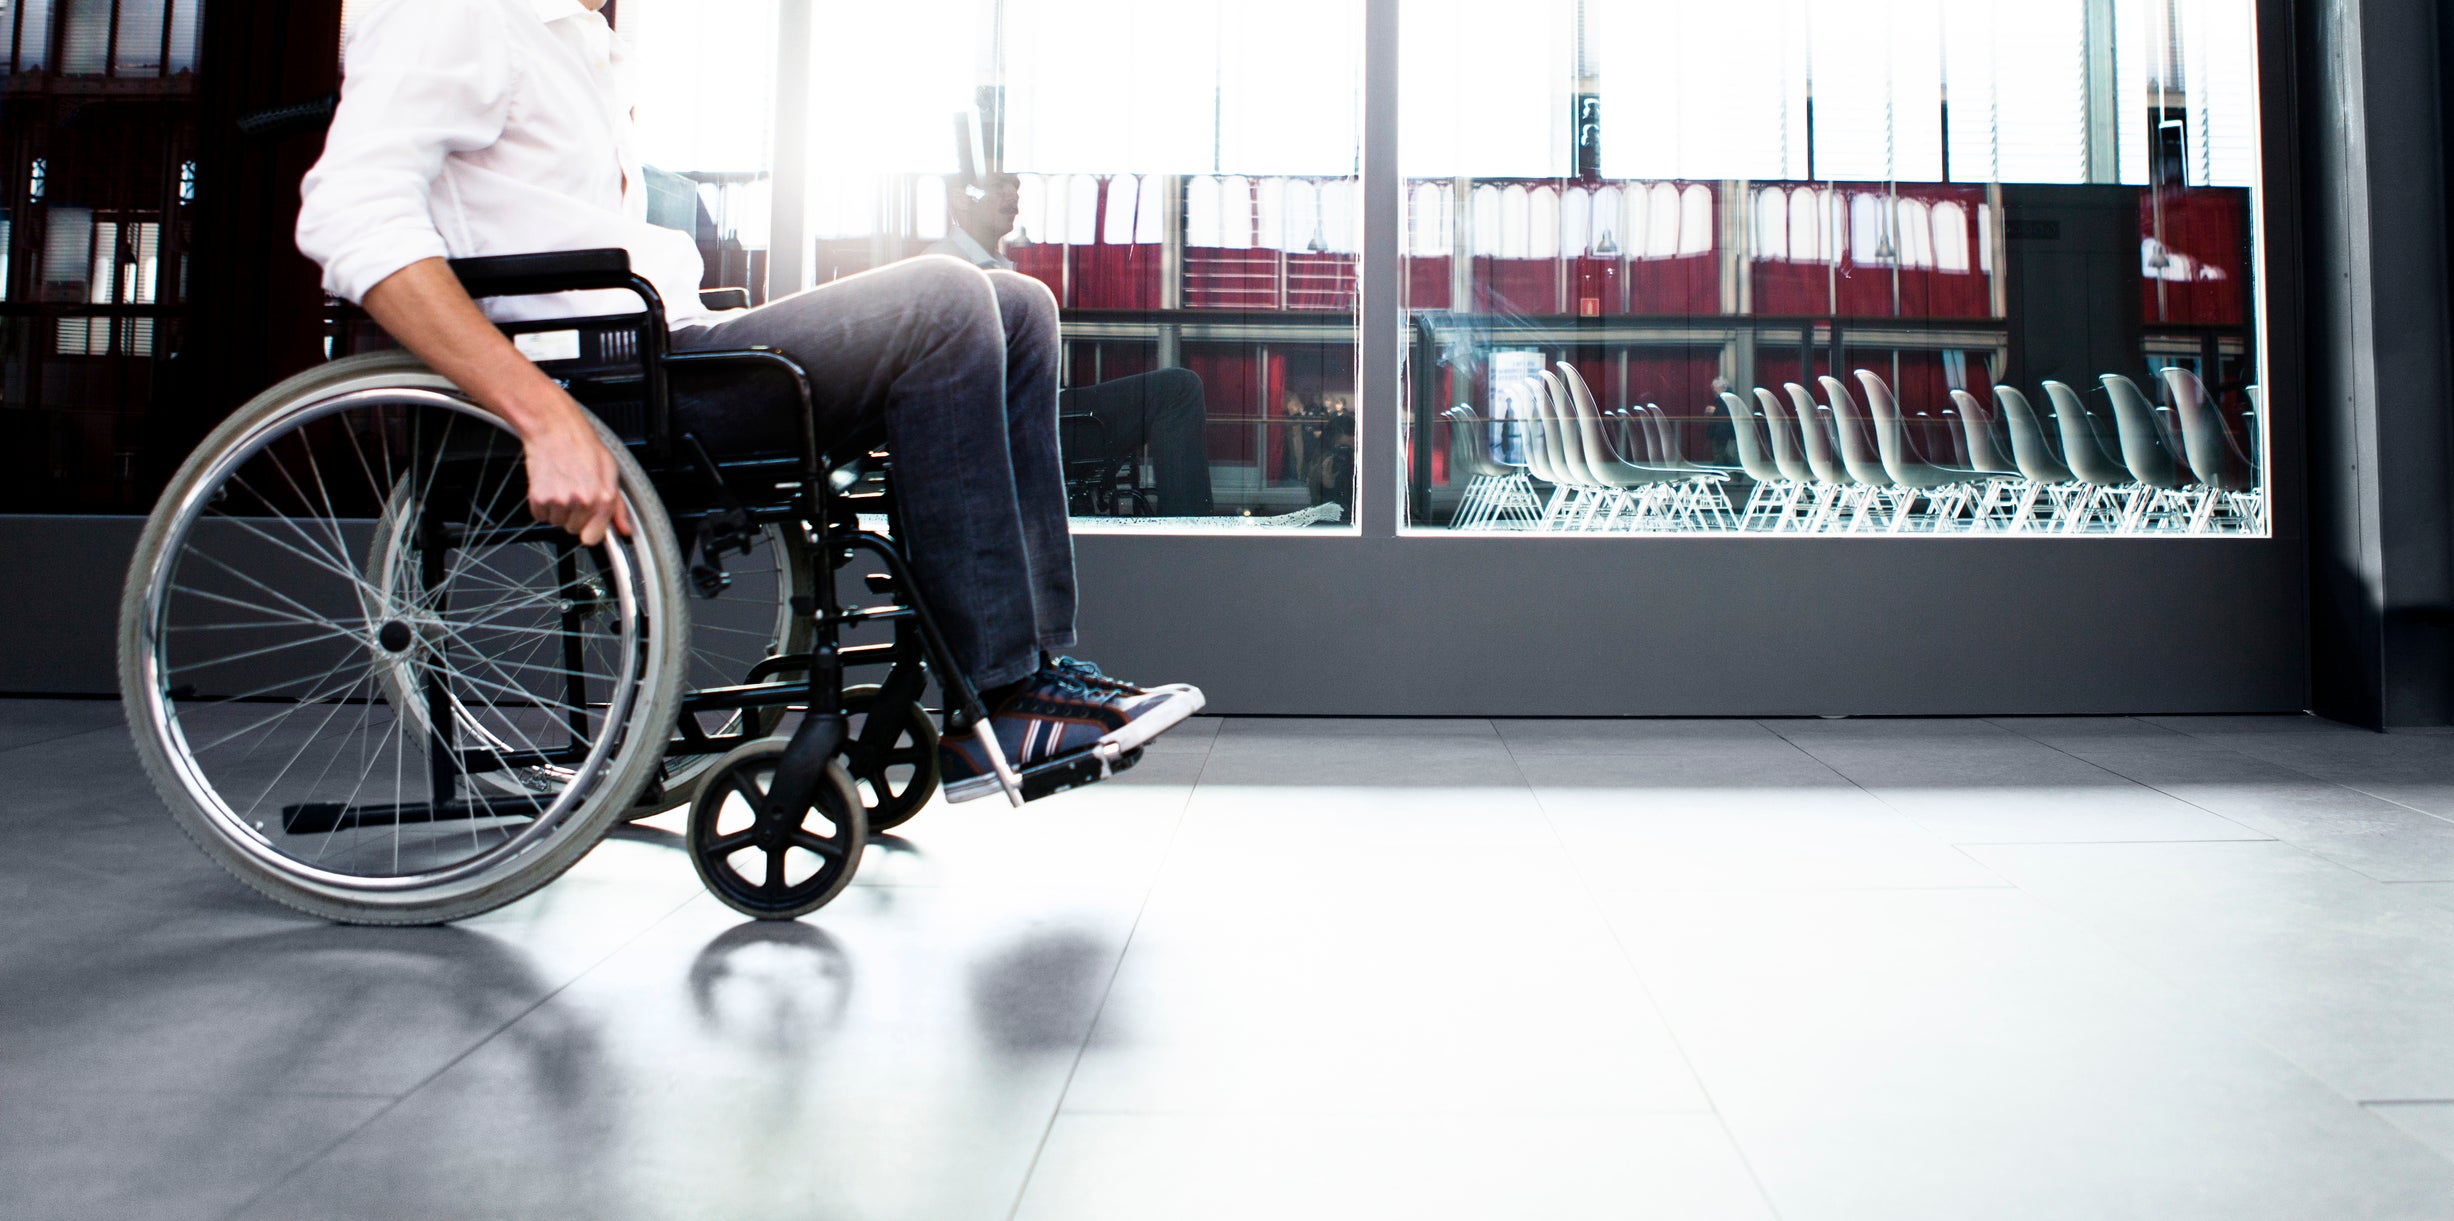 Airports are falling short at accessibility,